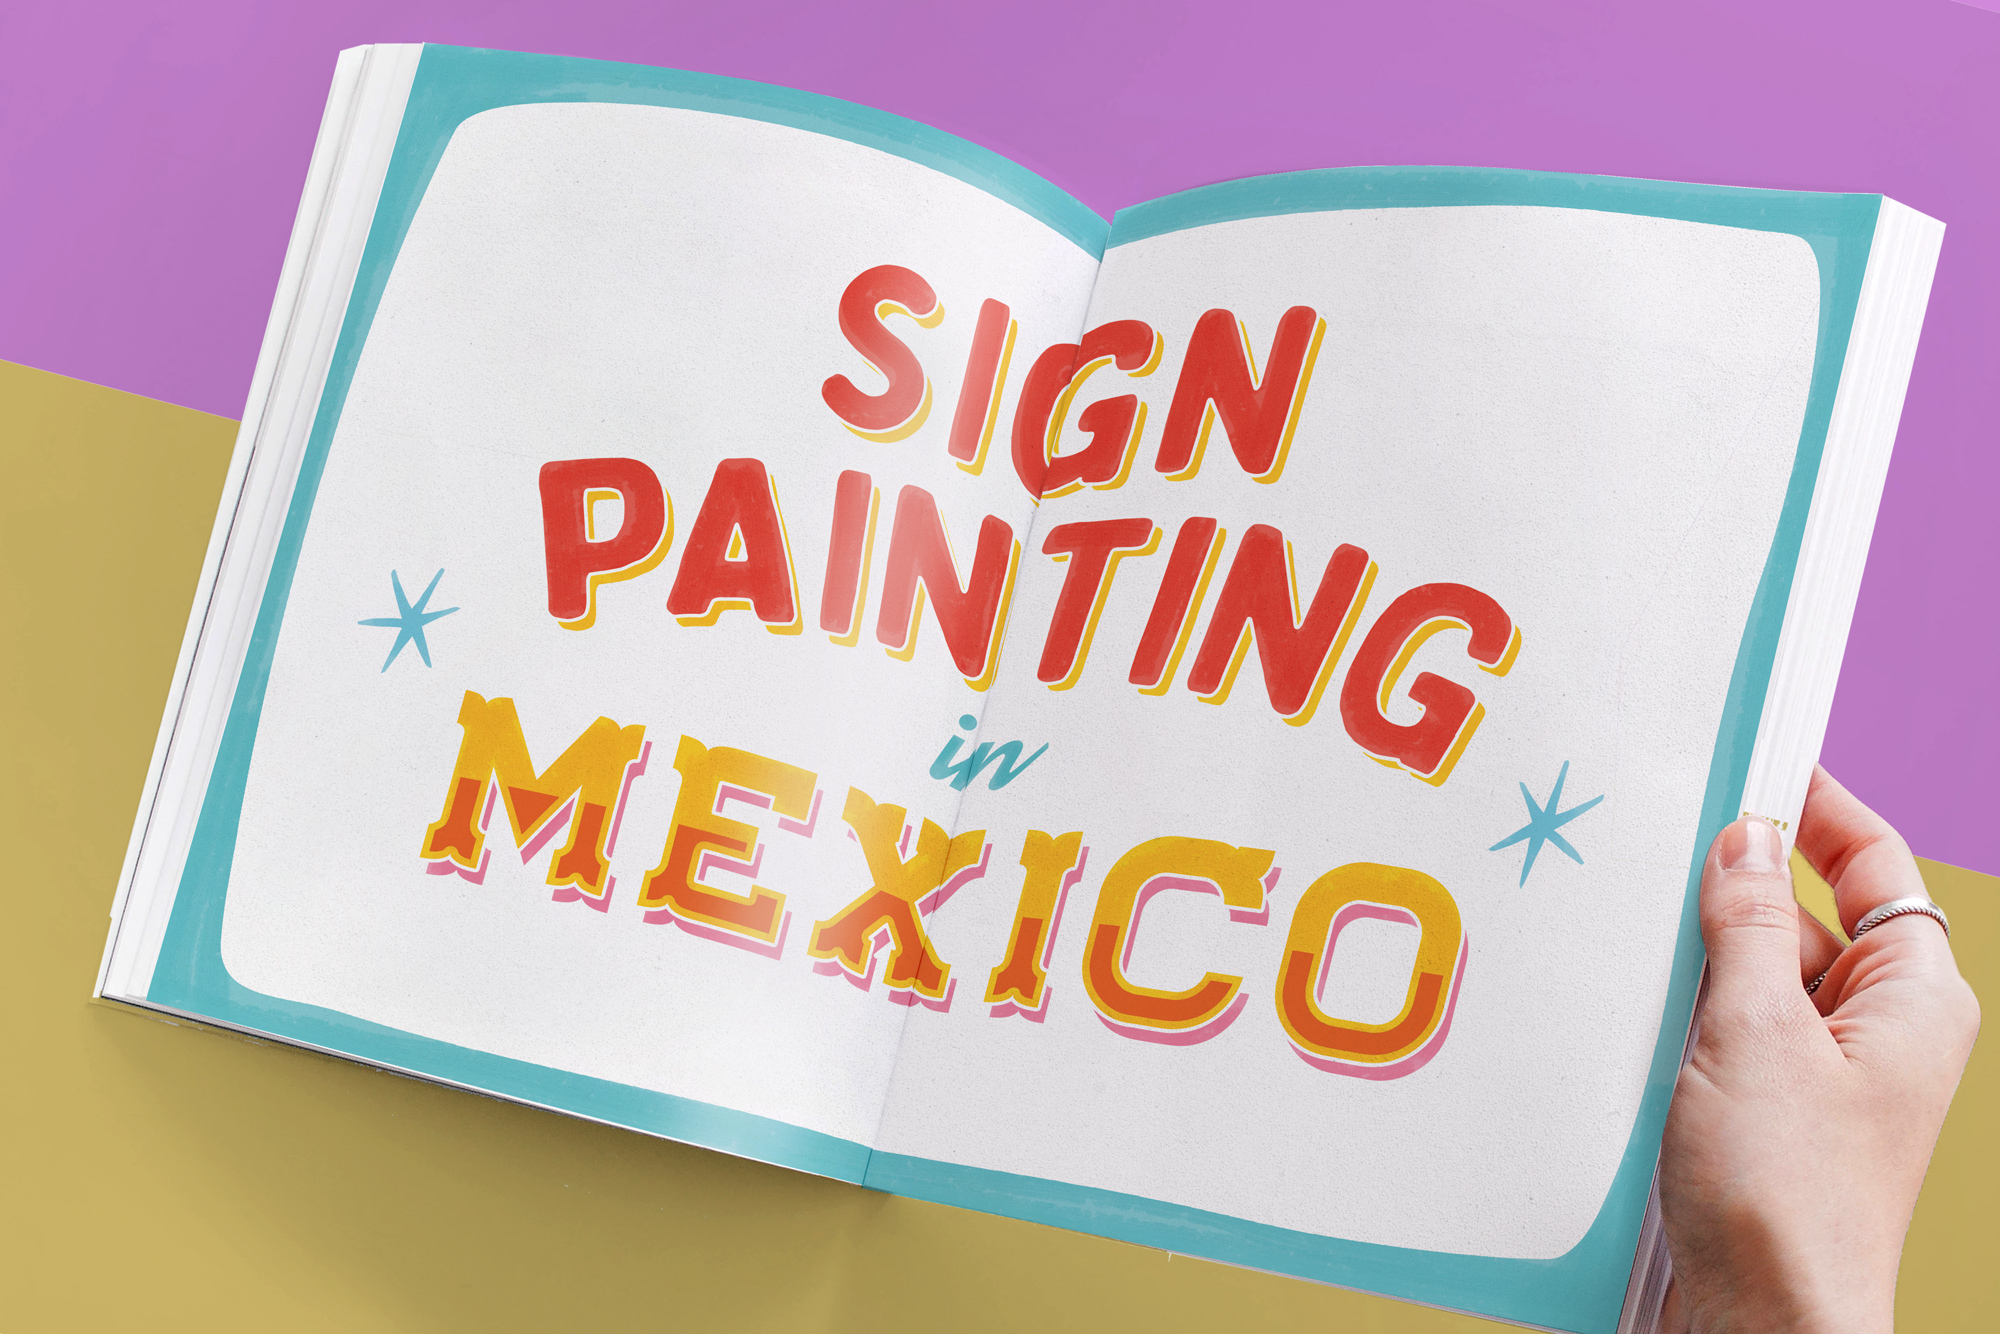 Mexican Culture and the popular graphic